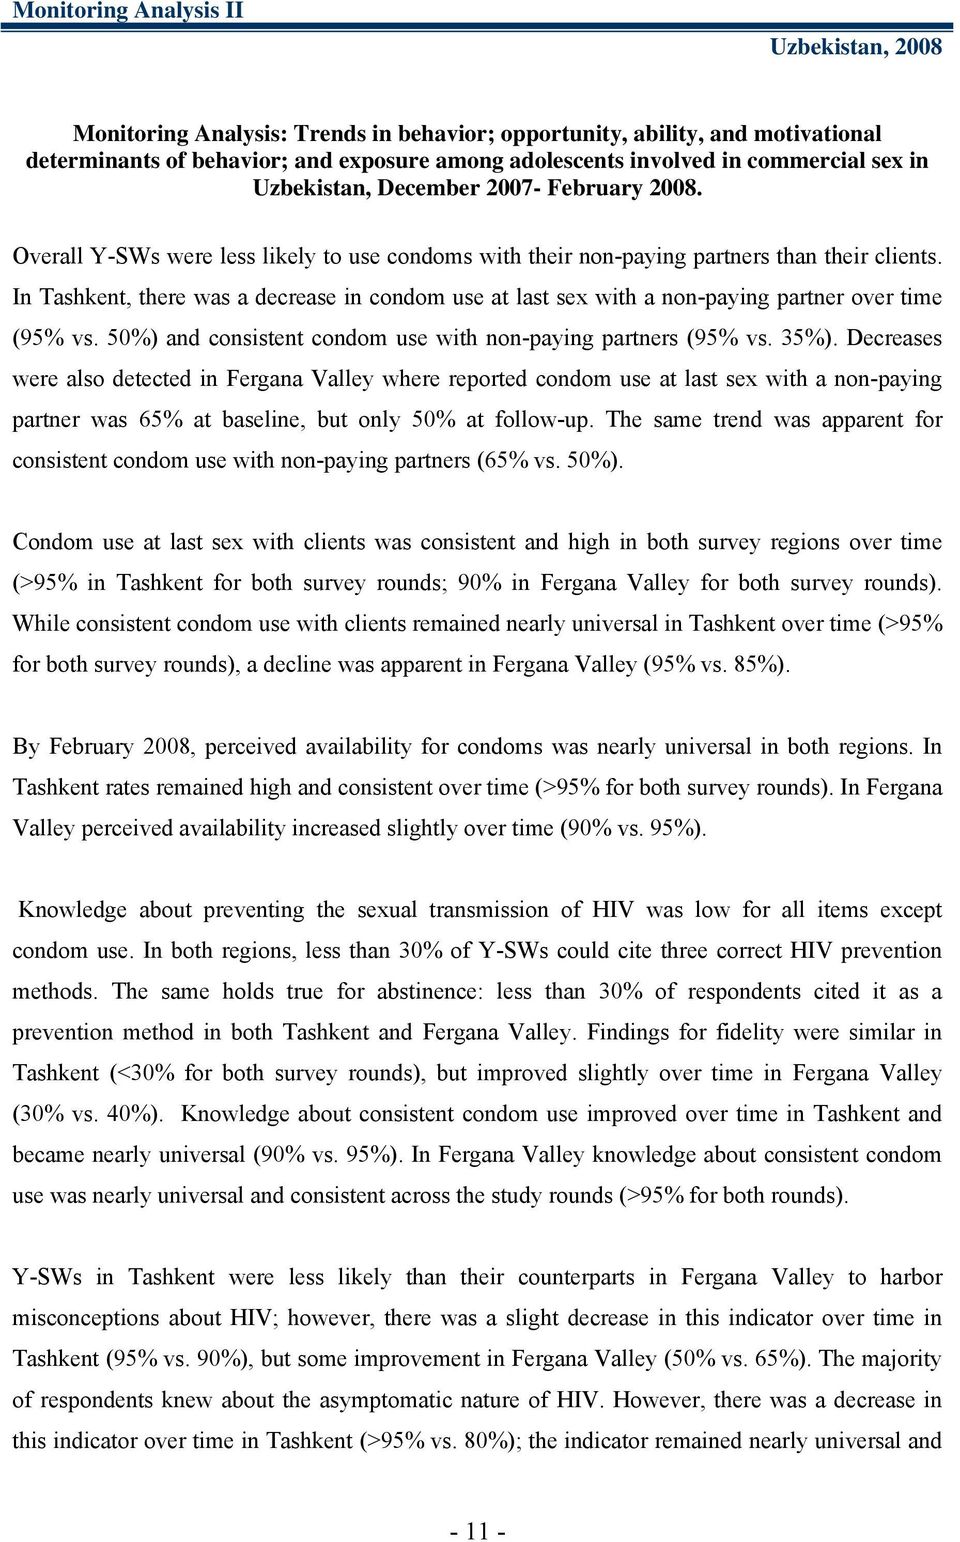 In Tashkent, there was a decrease in condom use at last sex with a nonpaying partner over time (95% vs. 50%) and consistent condom use with nonpaying partners (95% vs. 35%).